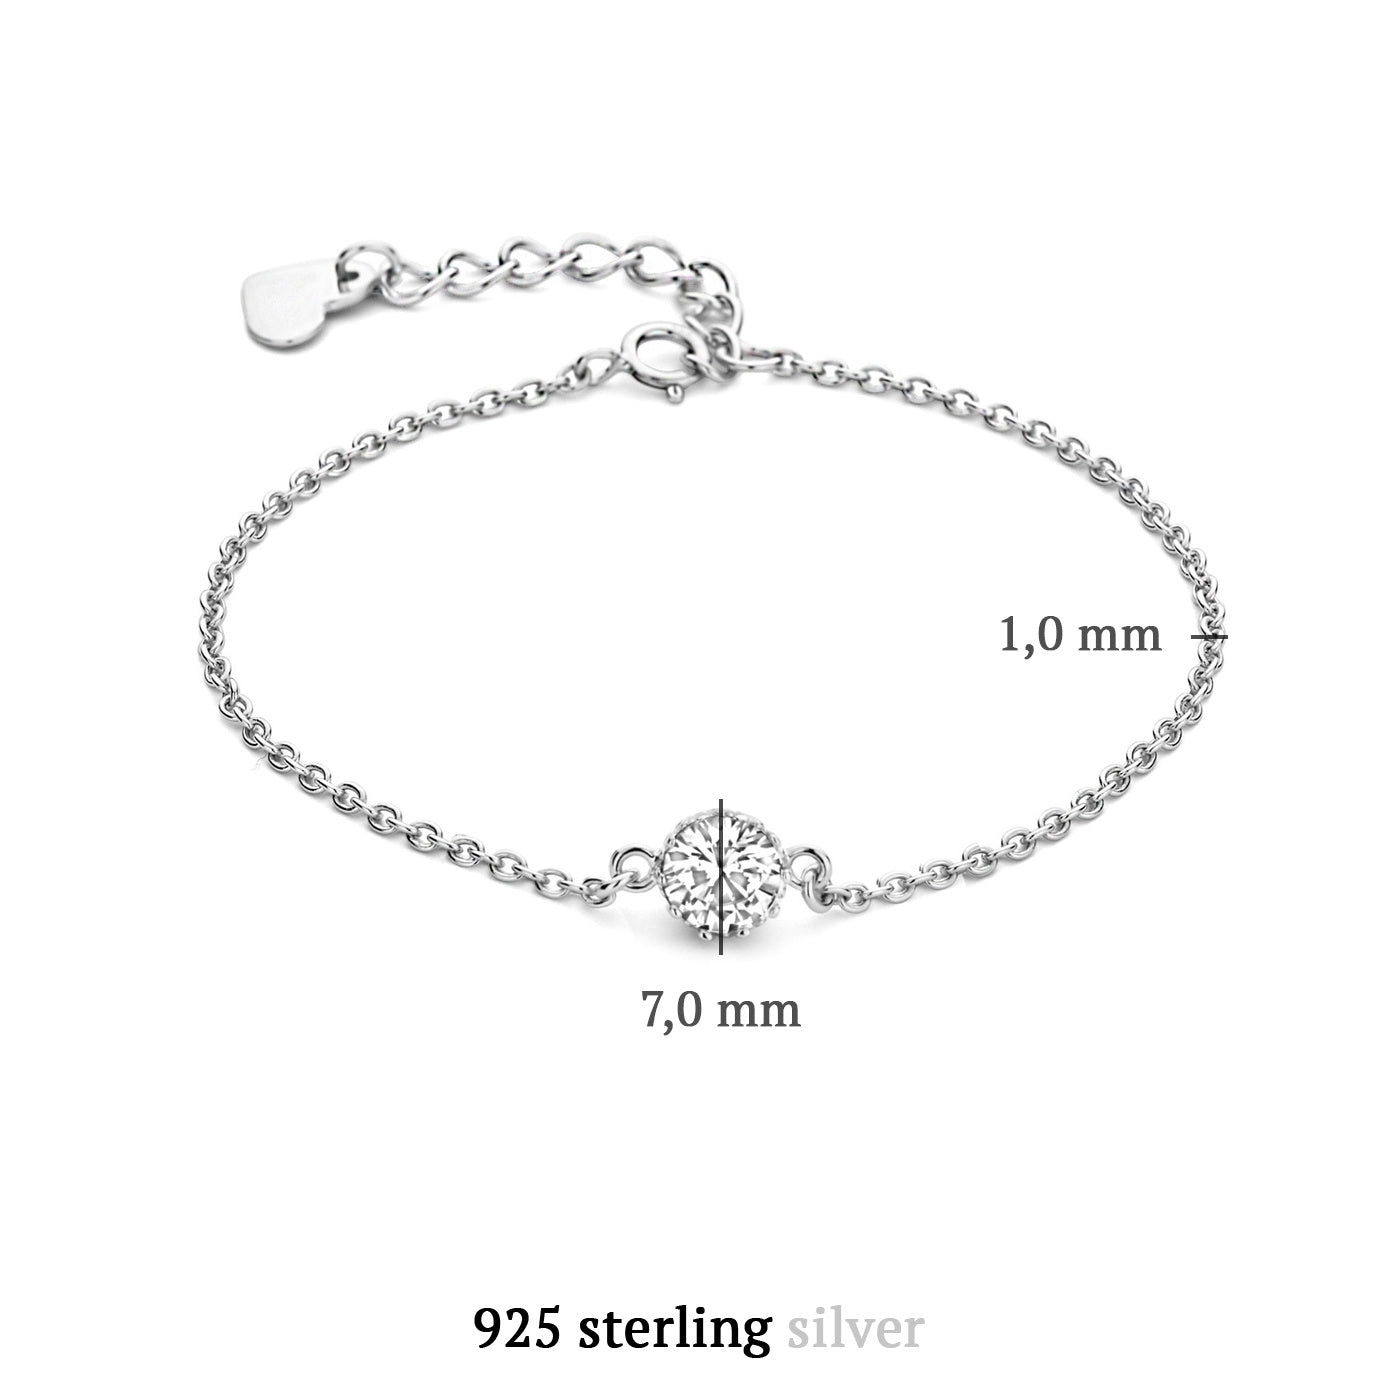 Cento Luci Rosia 925 Sterling Silber Armband mit Zirkonia Stein